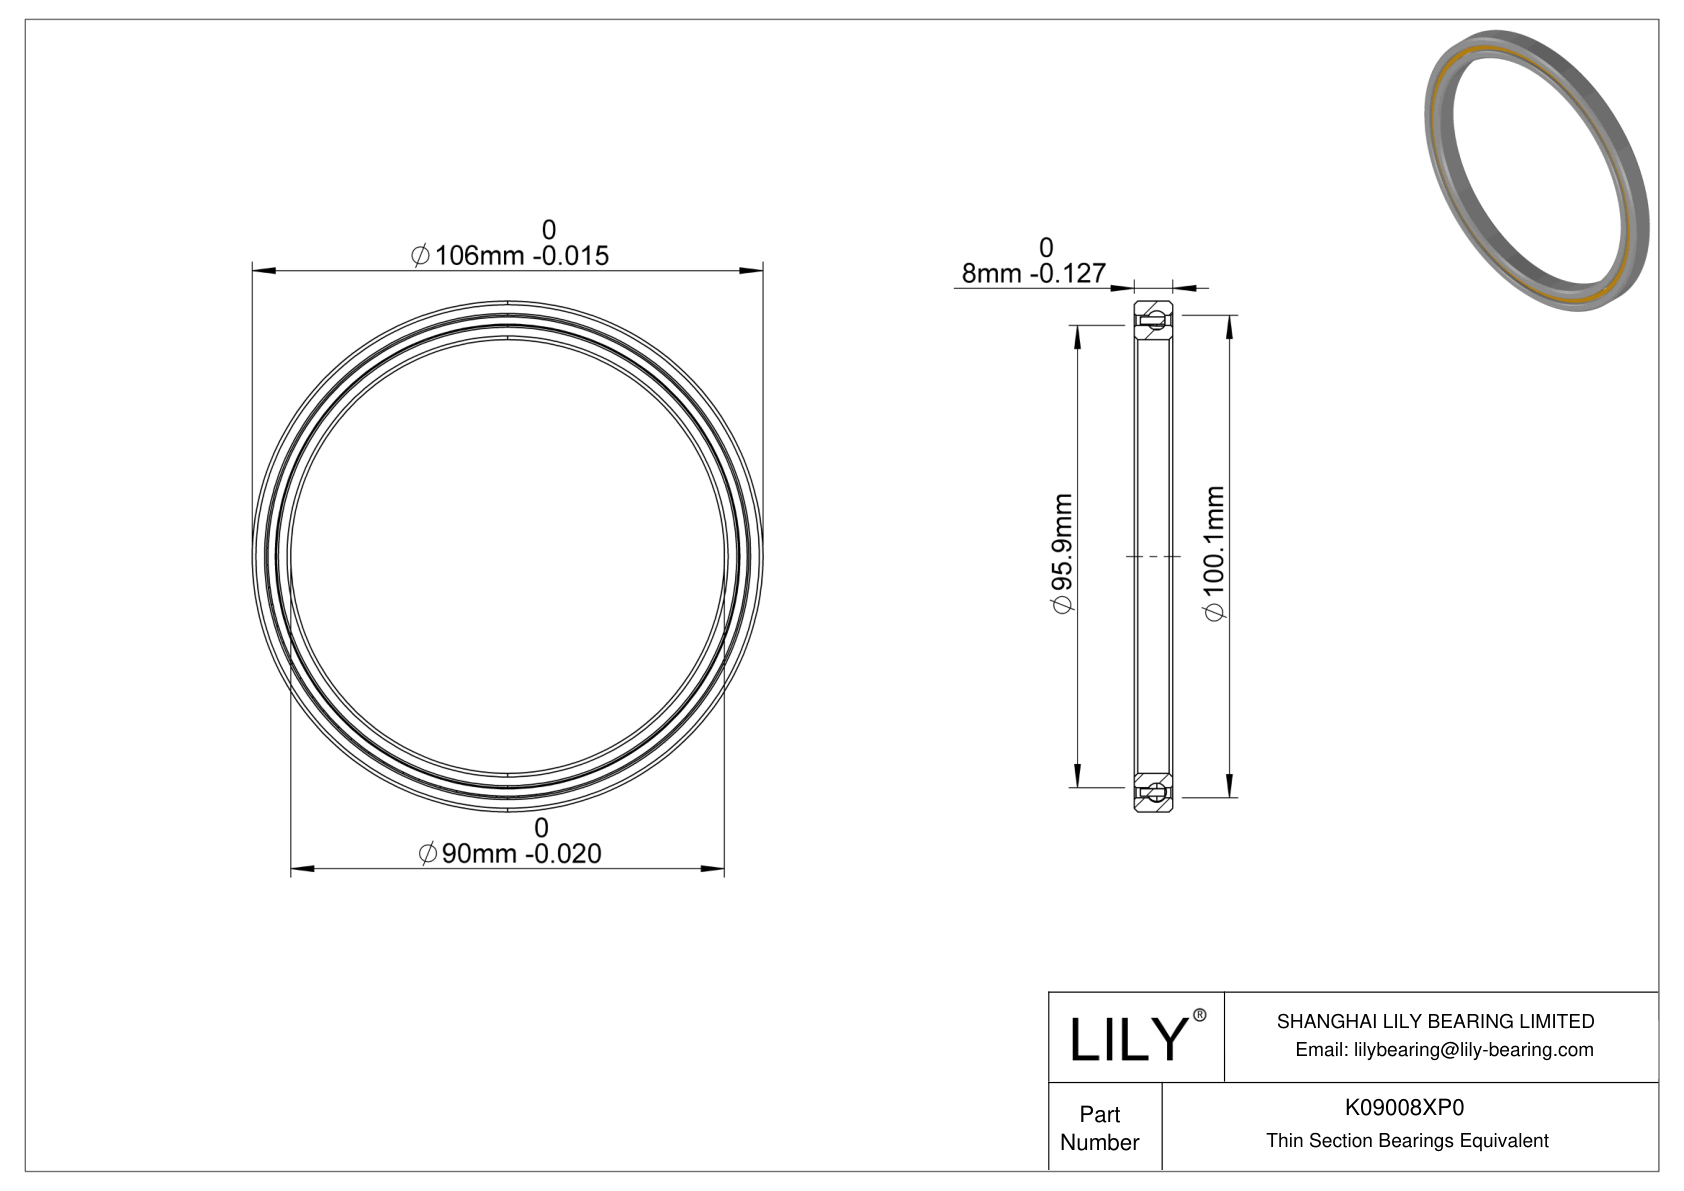 K09008XP0 Constant Section (CS) Bearings cad drawing